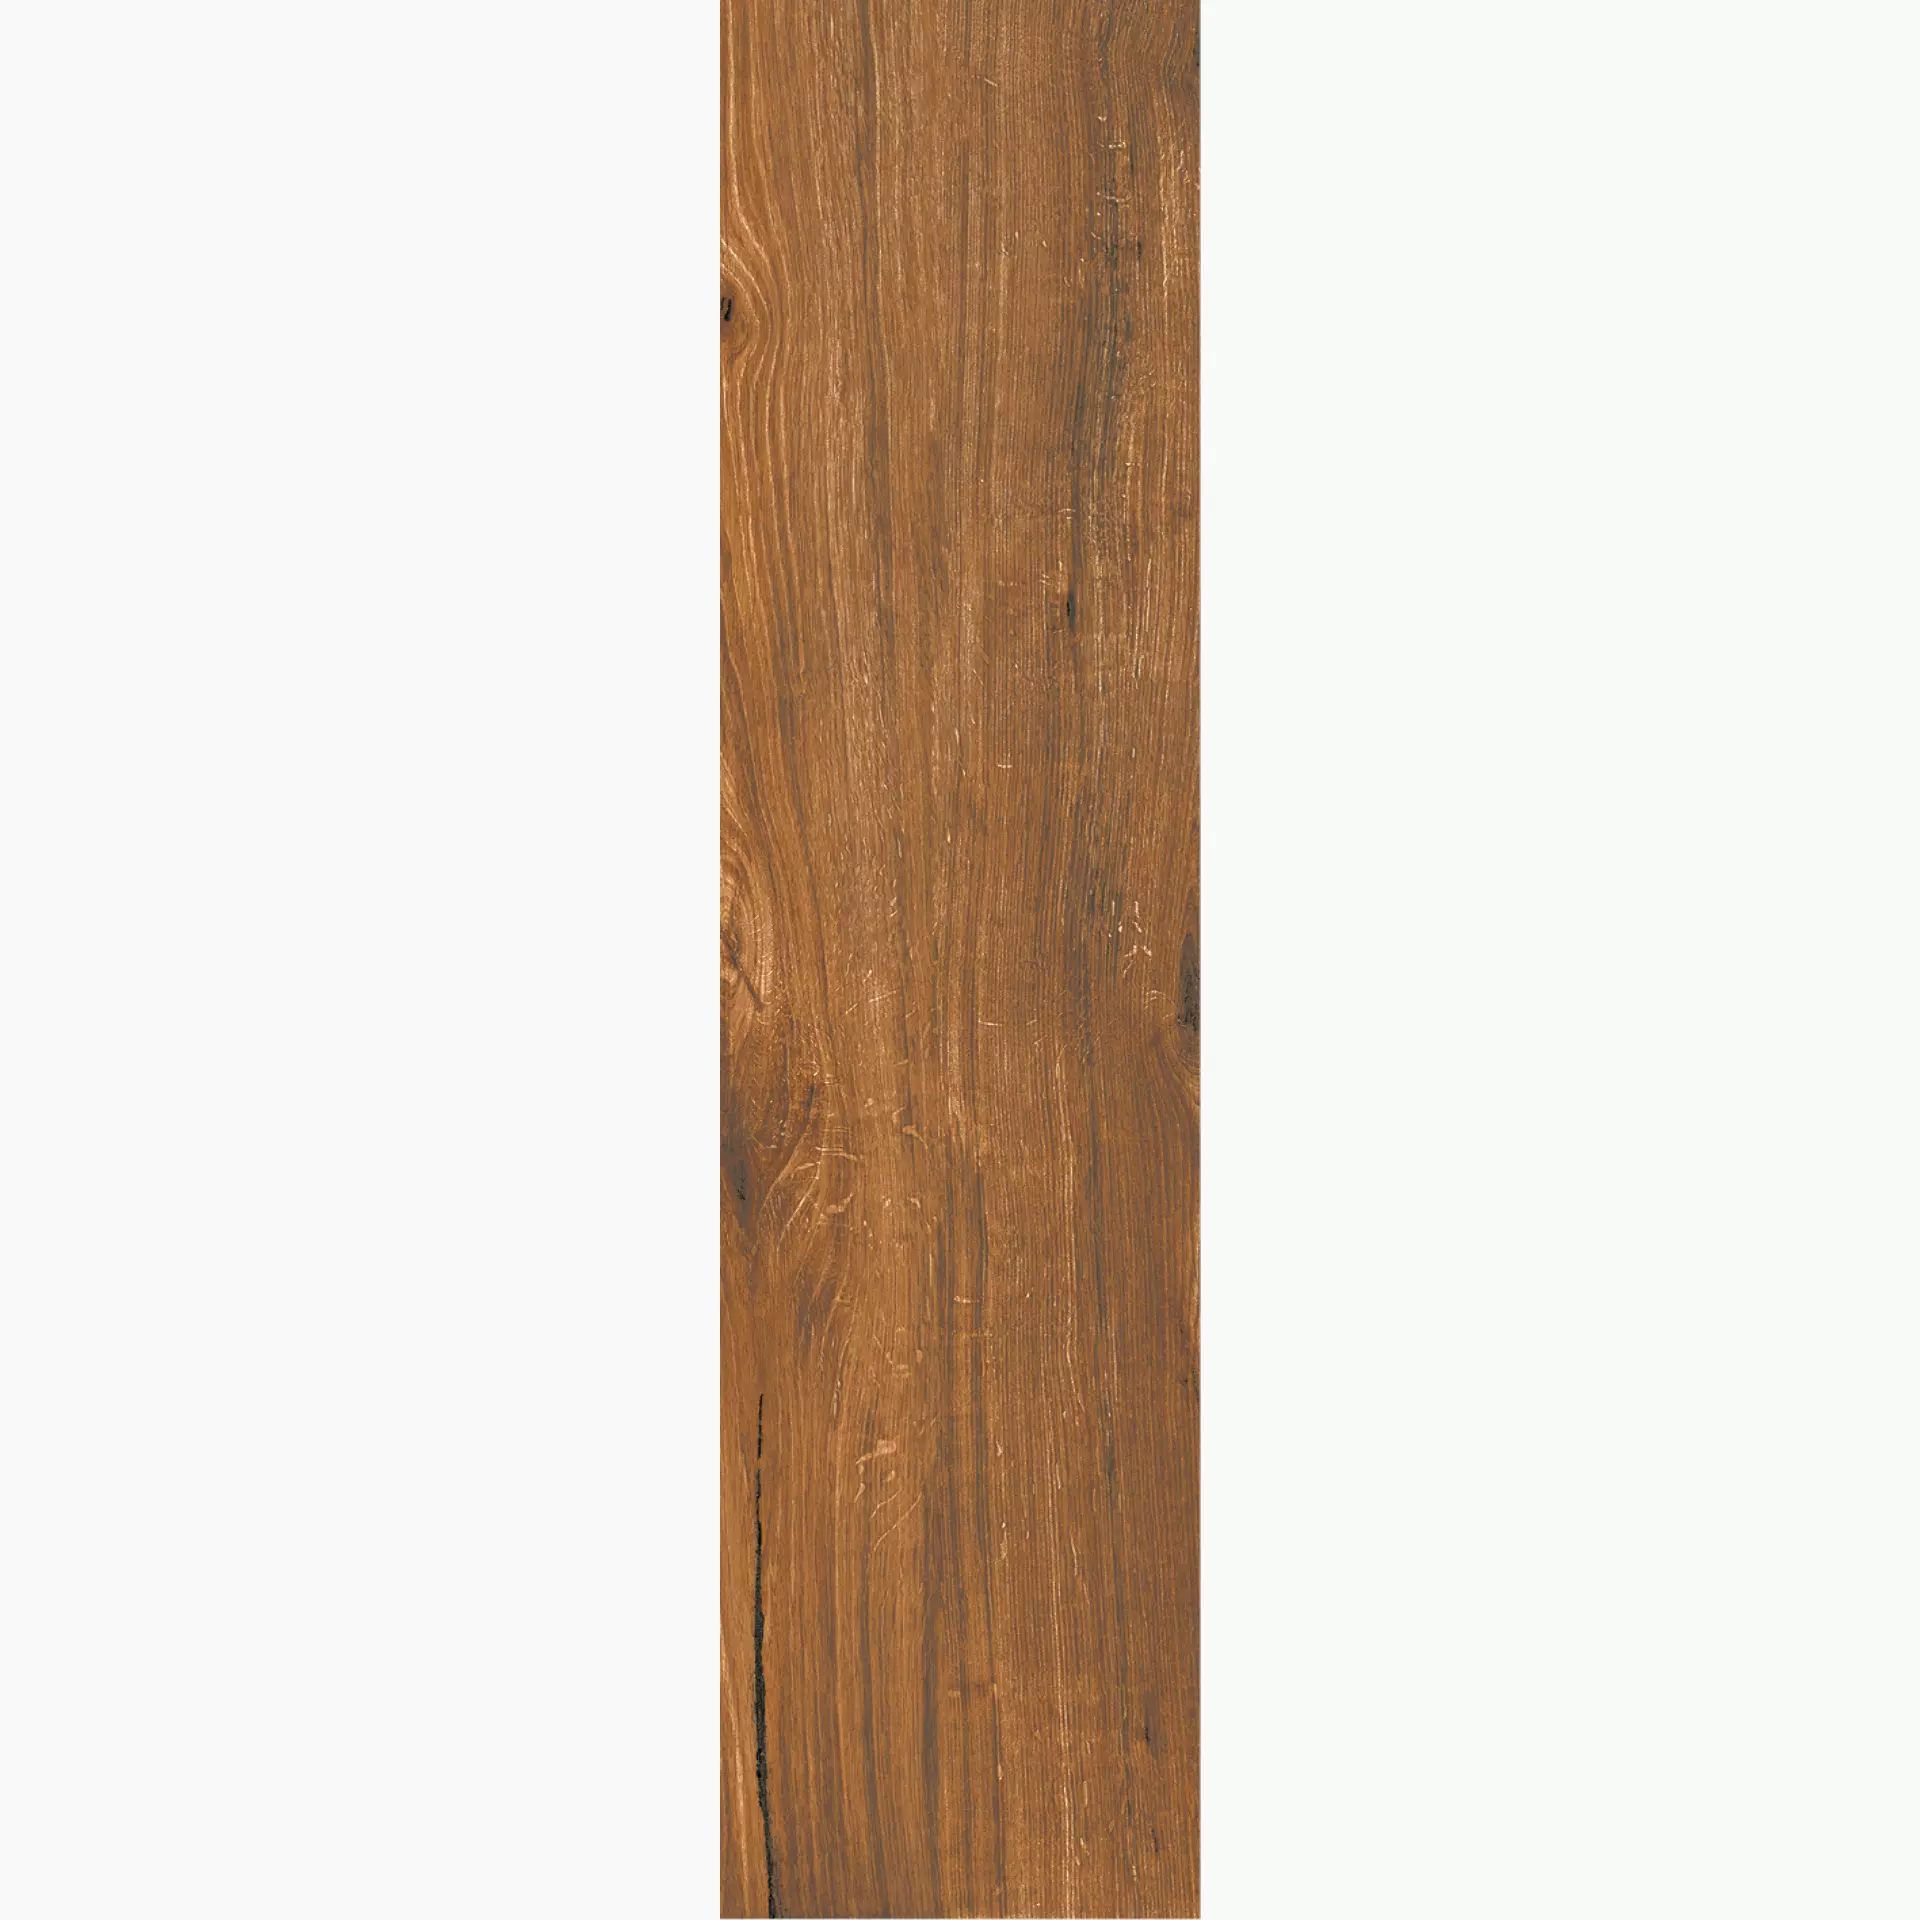 Novabell Artwood Cherry Naturale AWD53RT 30x120cm rectified 9mm